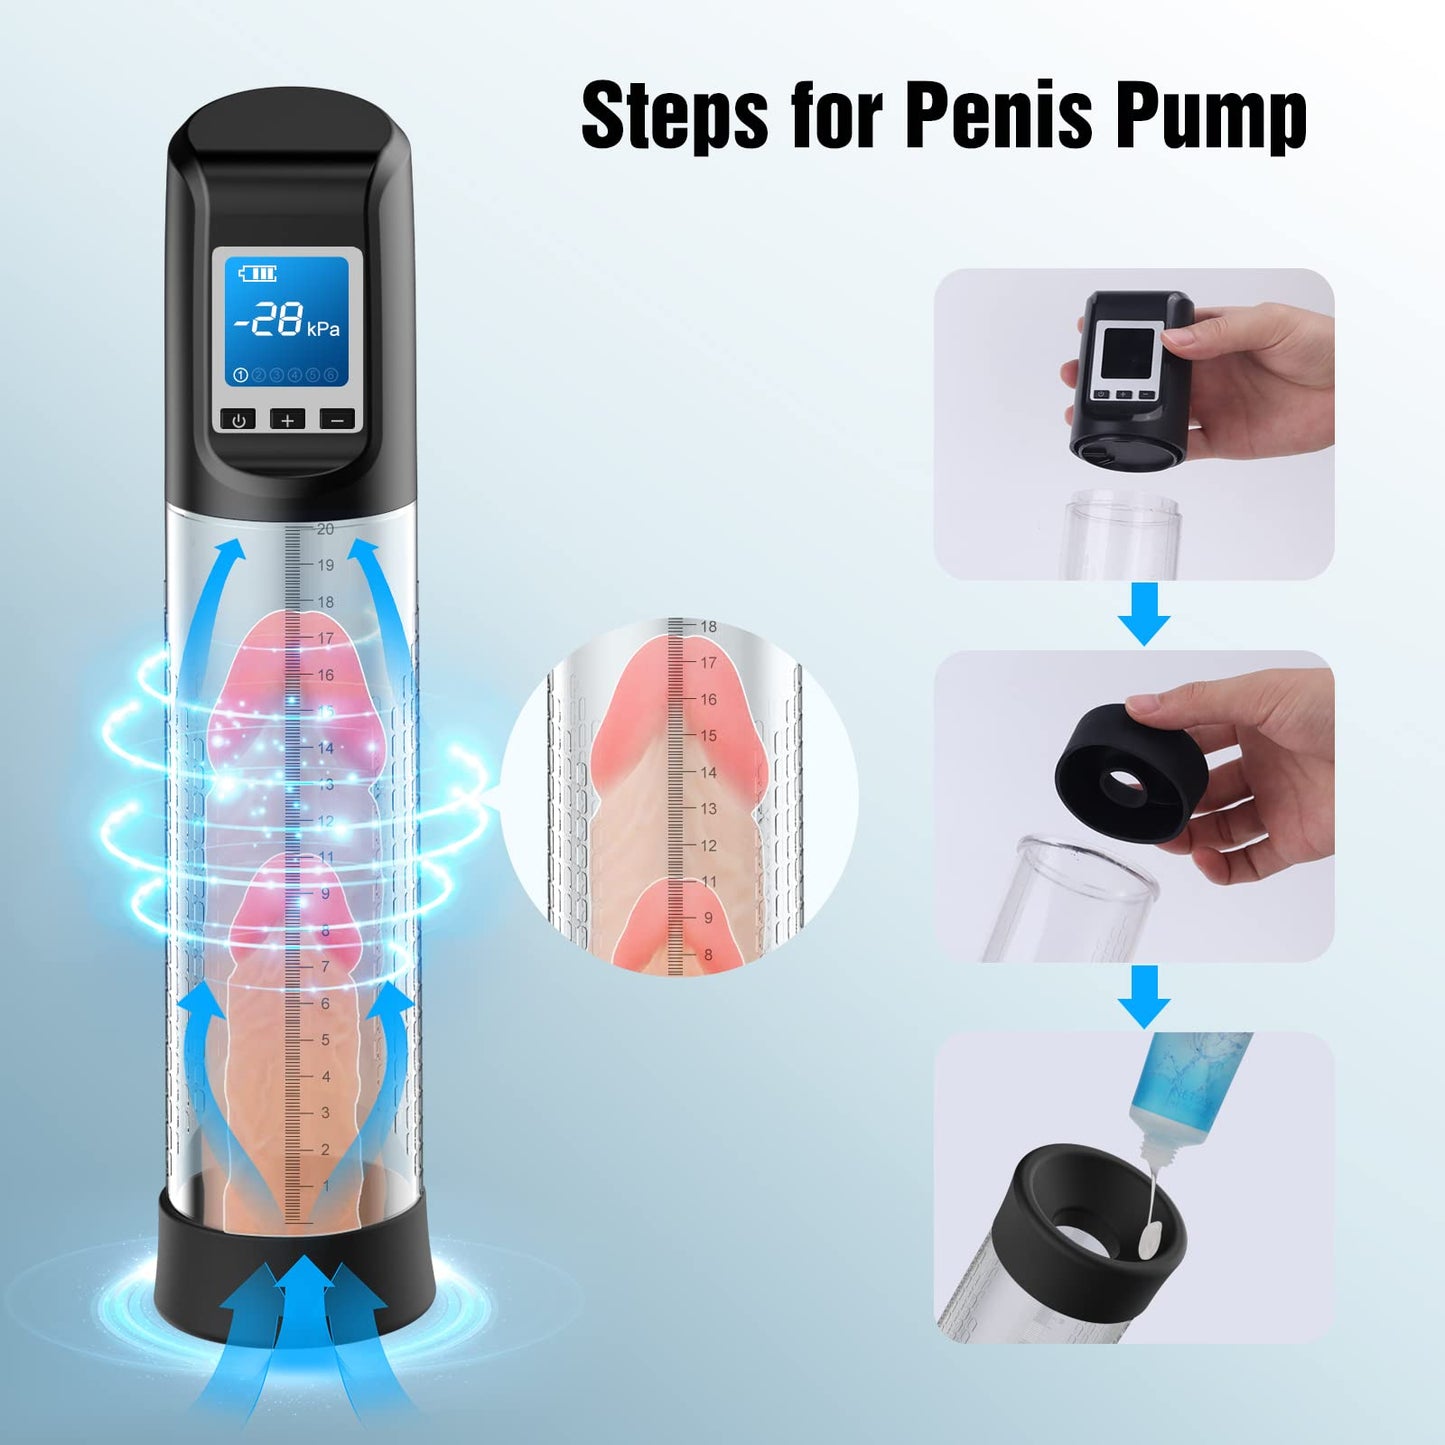 6 Suction 9 Vibration Vacuum Penis Pump With Pocket Pussy